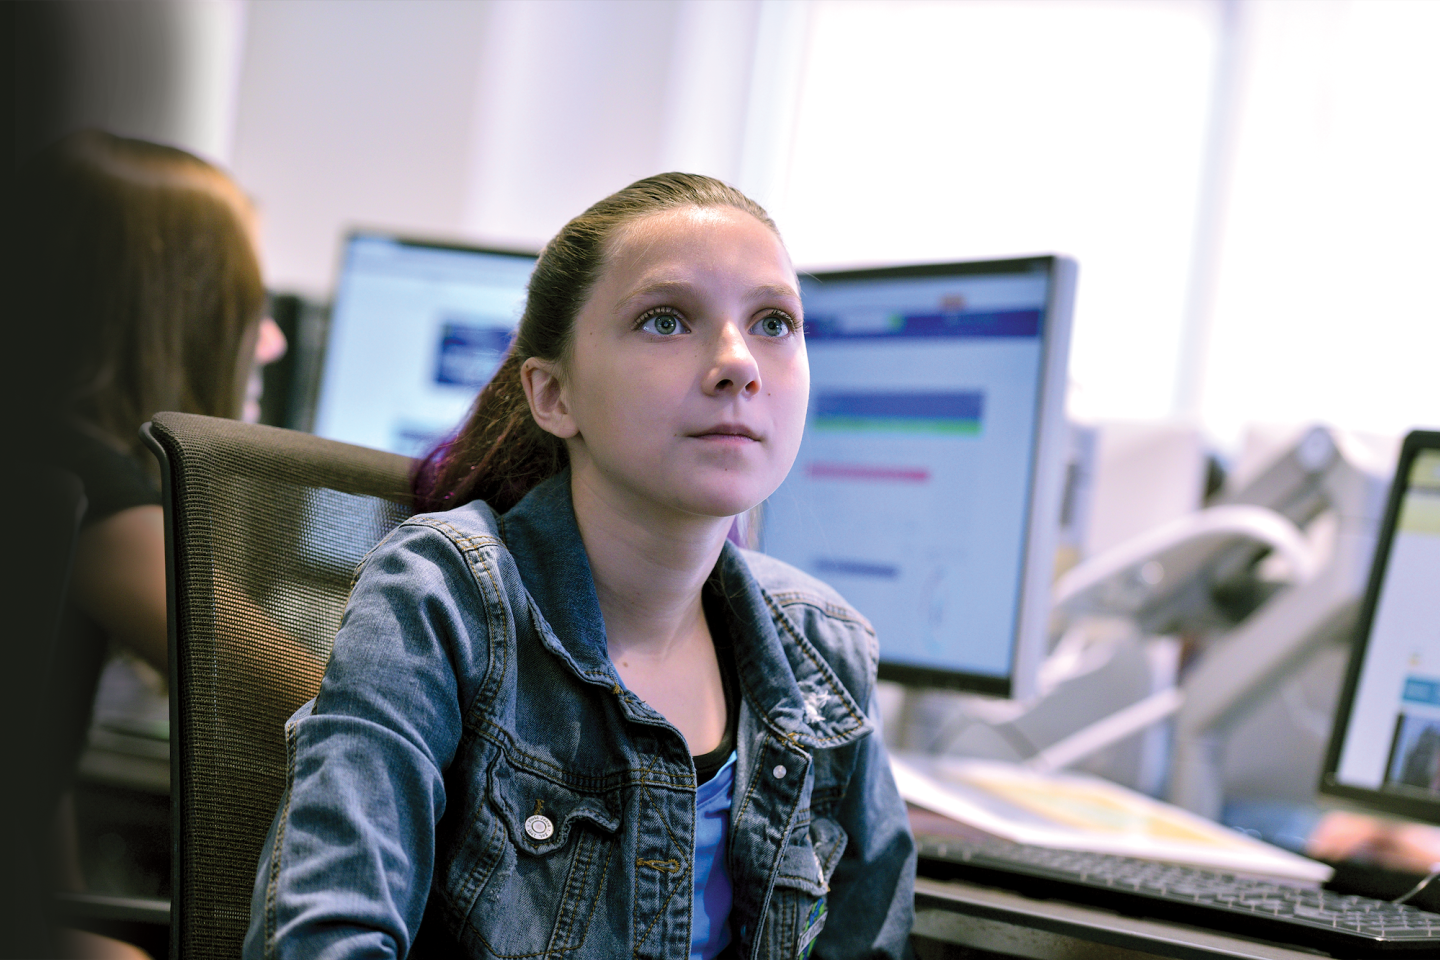 A girl looks at a computer screen in a computer lab.